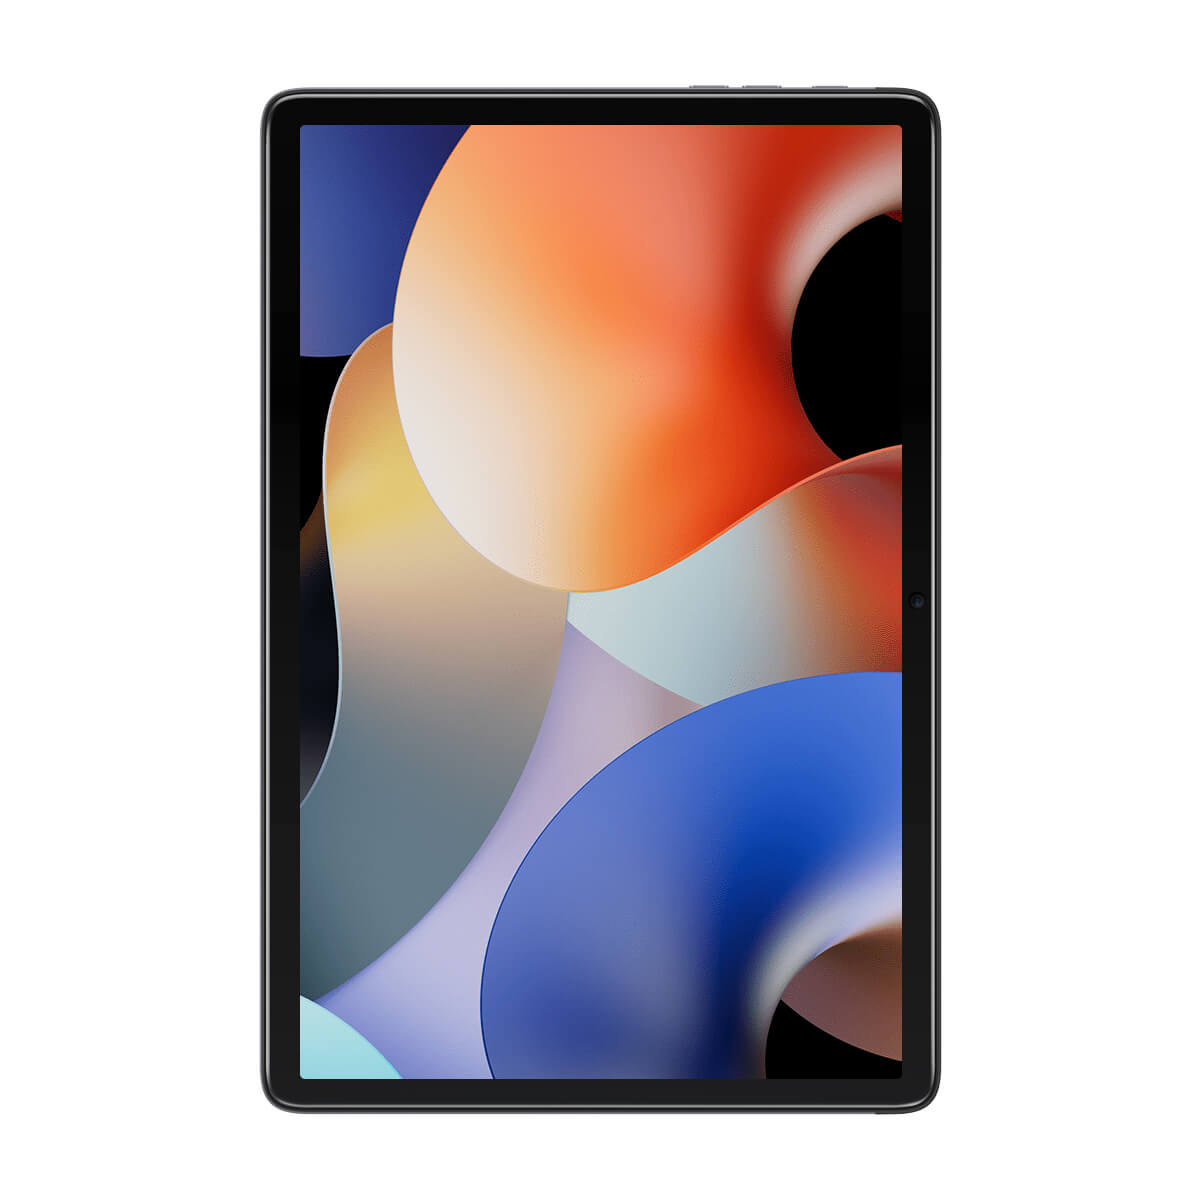 OSCAL Pad 10 8+128GB 6580mAh Tablet – Blackview Official Store